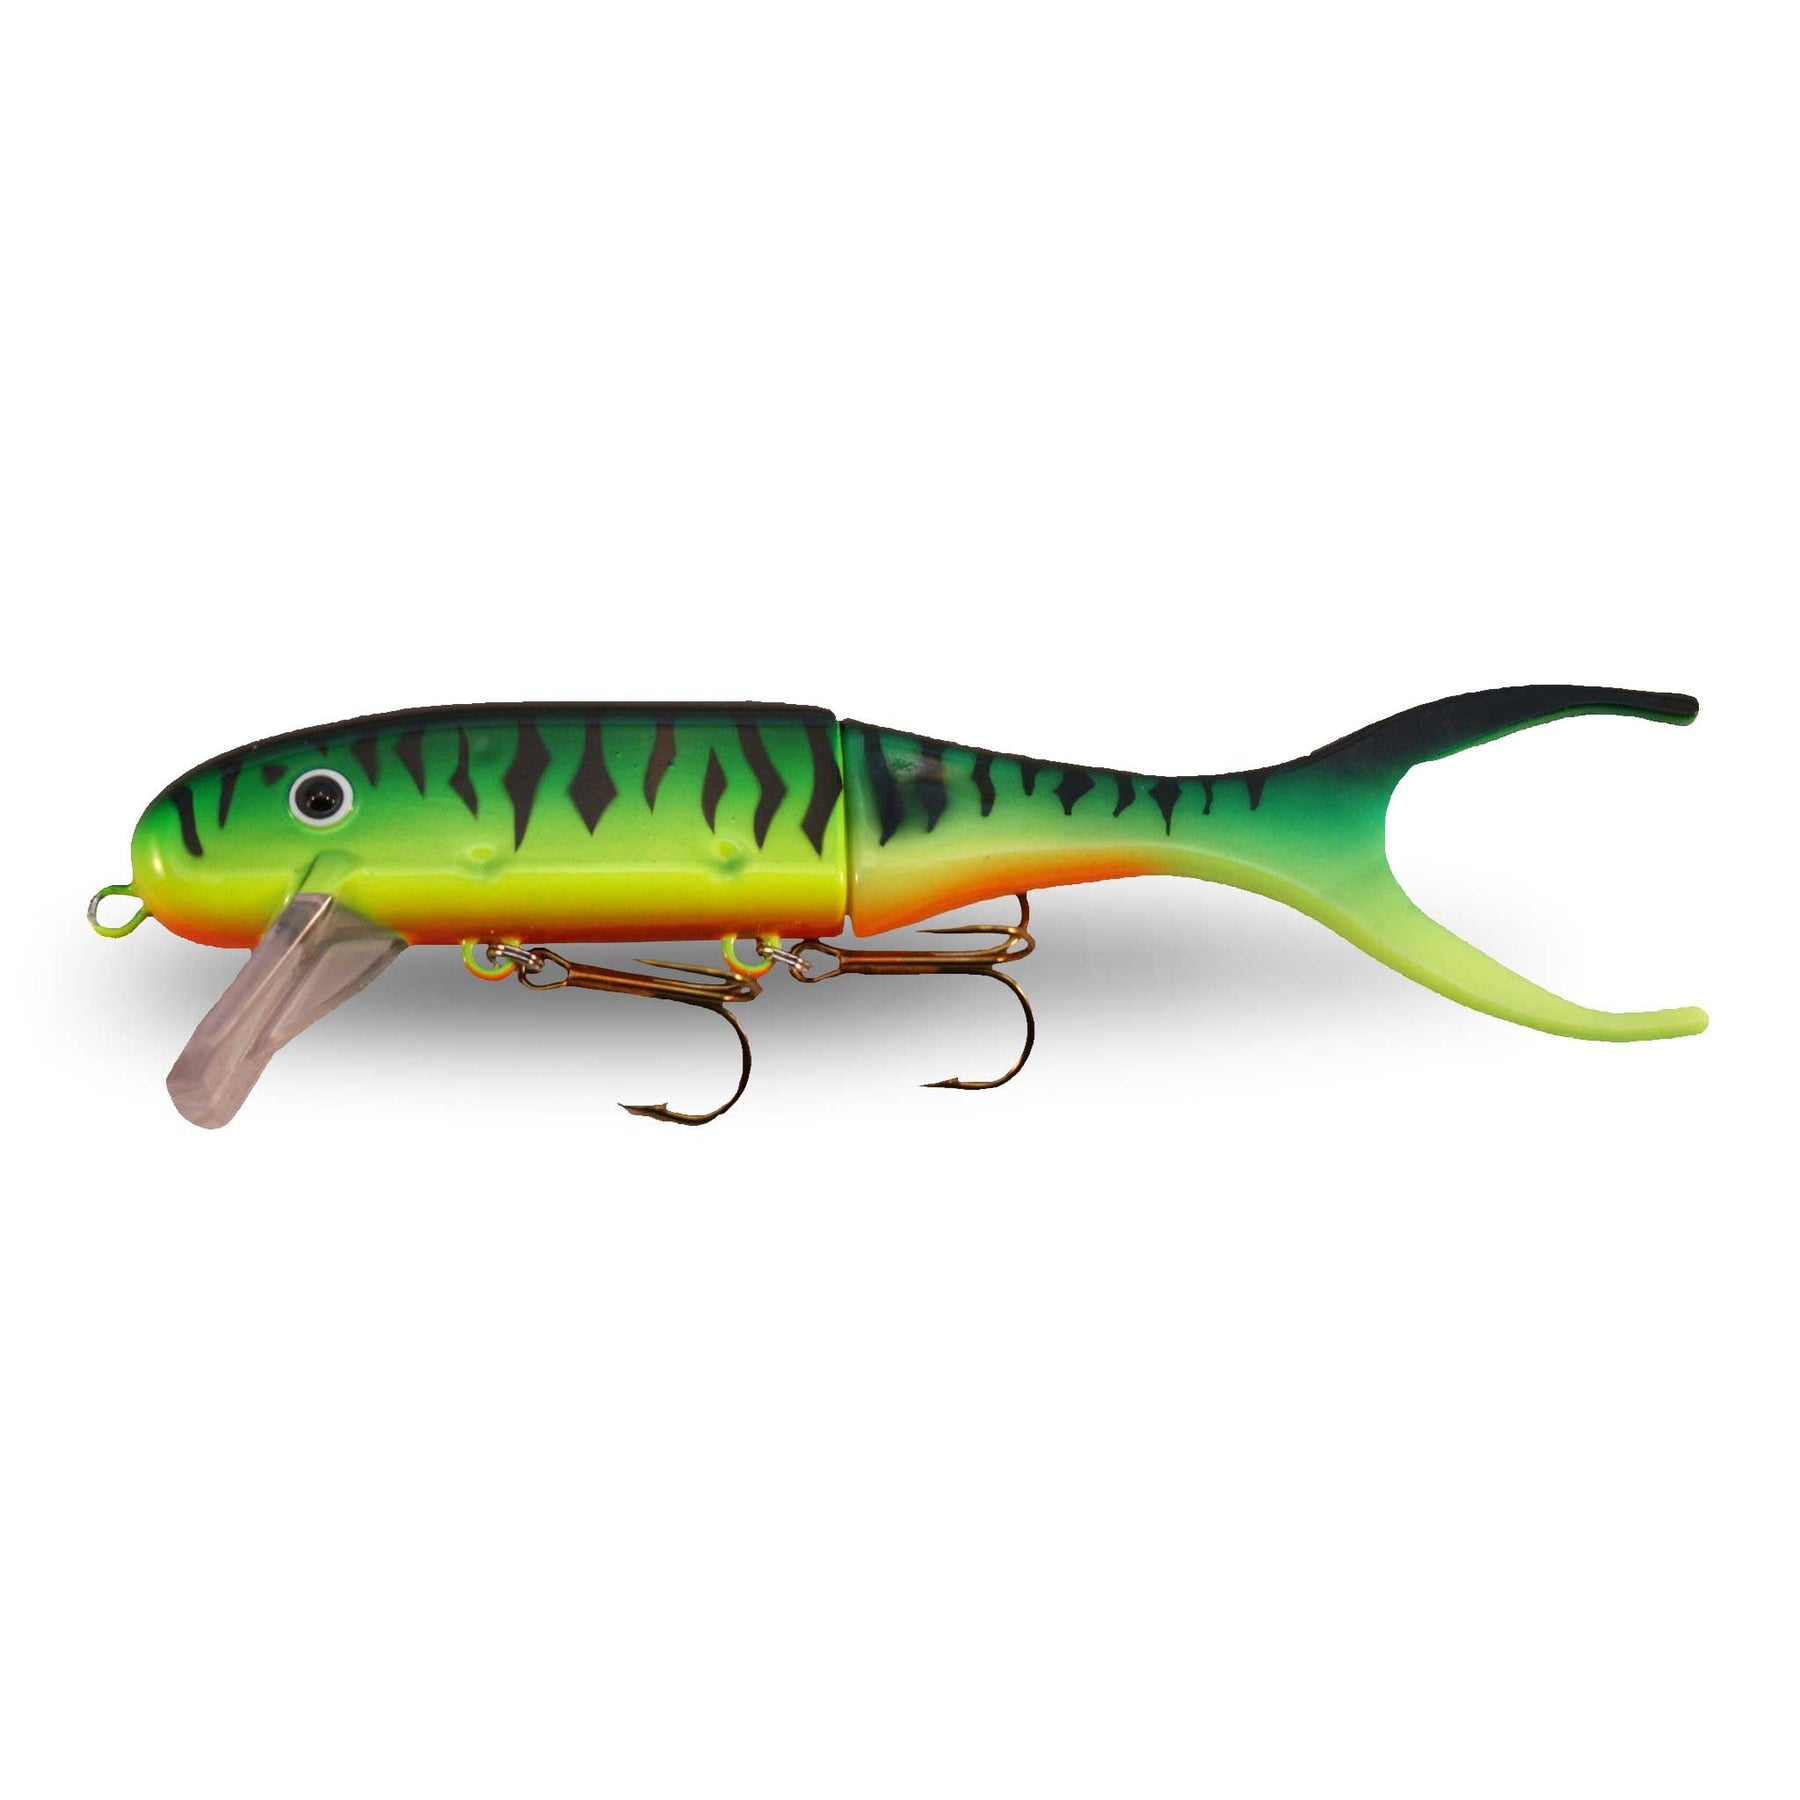  Musky Lures